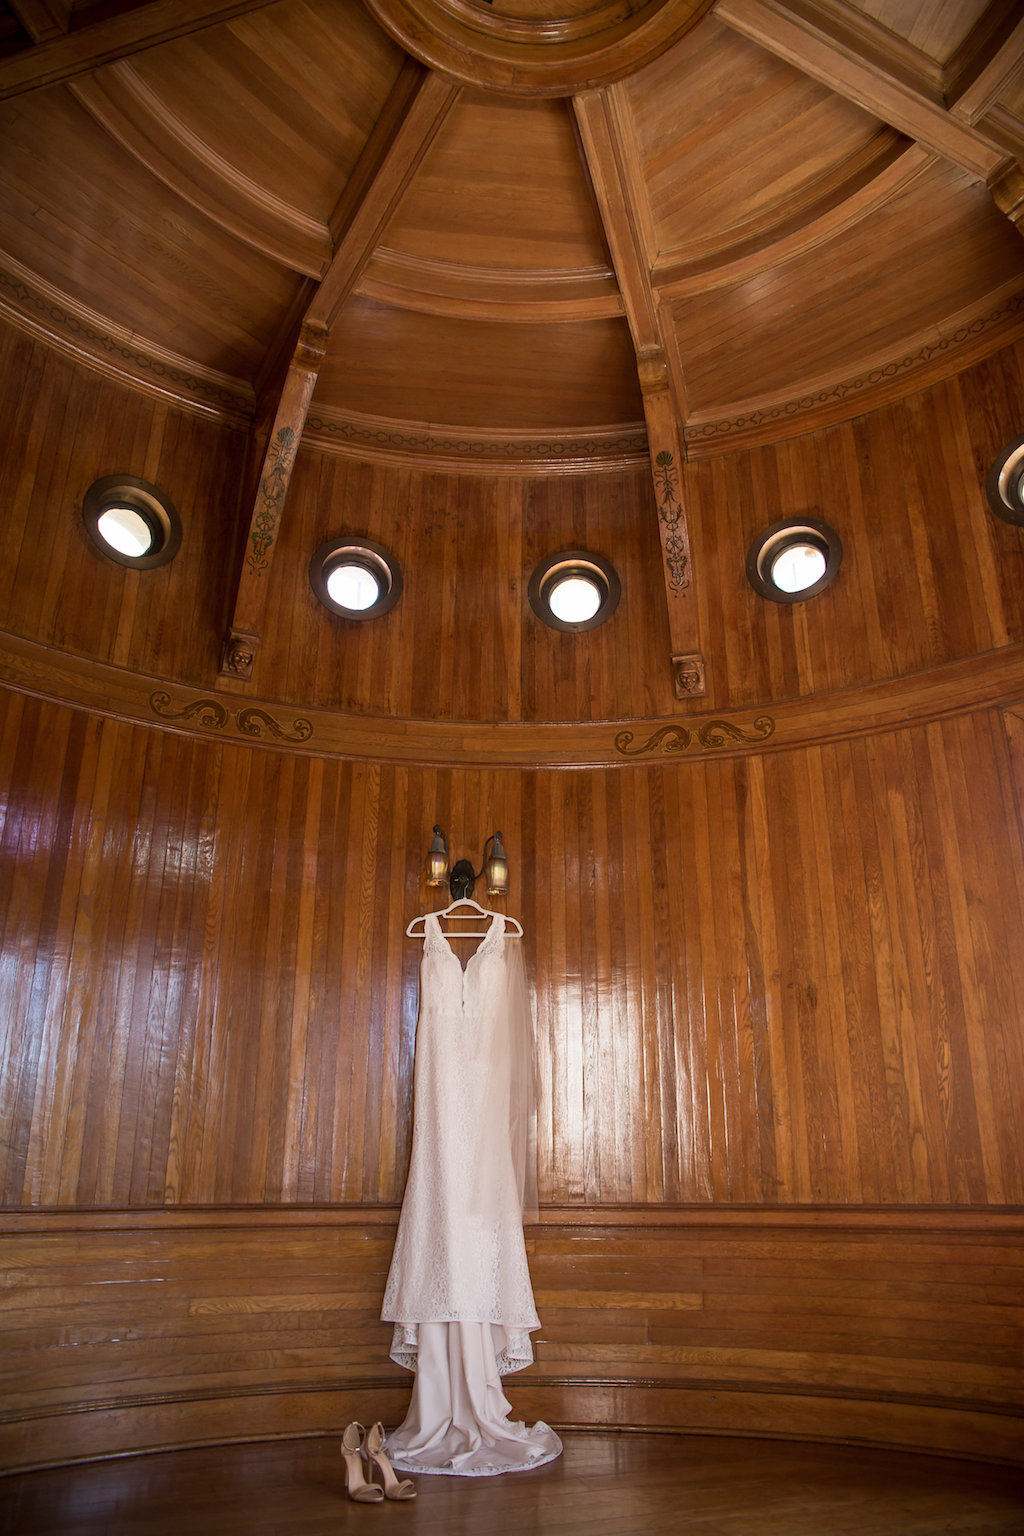 Lace Tank Top Strap Plunging Neckline Lace Wedding Dress Hanging in Wood Paneled Room | Tampa Bay Photographer Cat Pennenga Photography | Venue Powel Crosley Estate